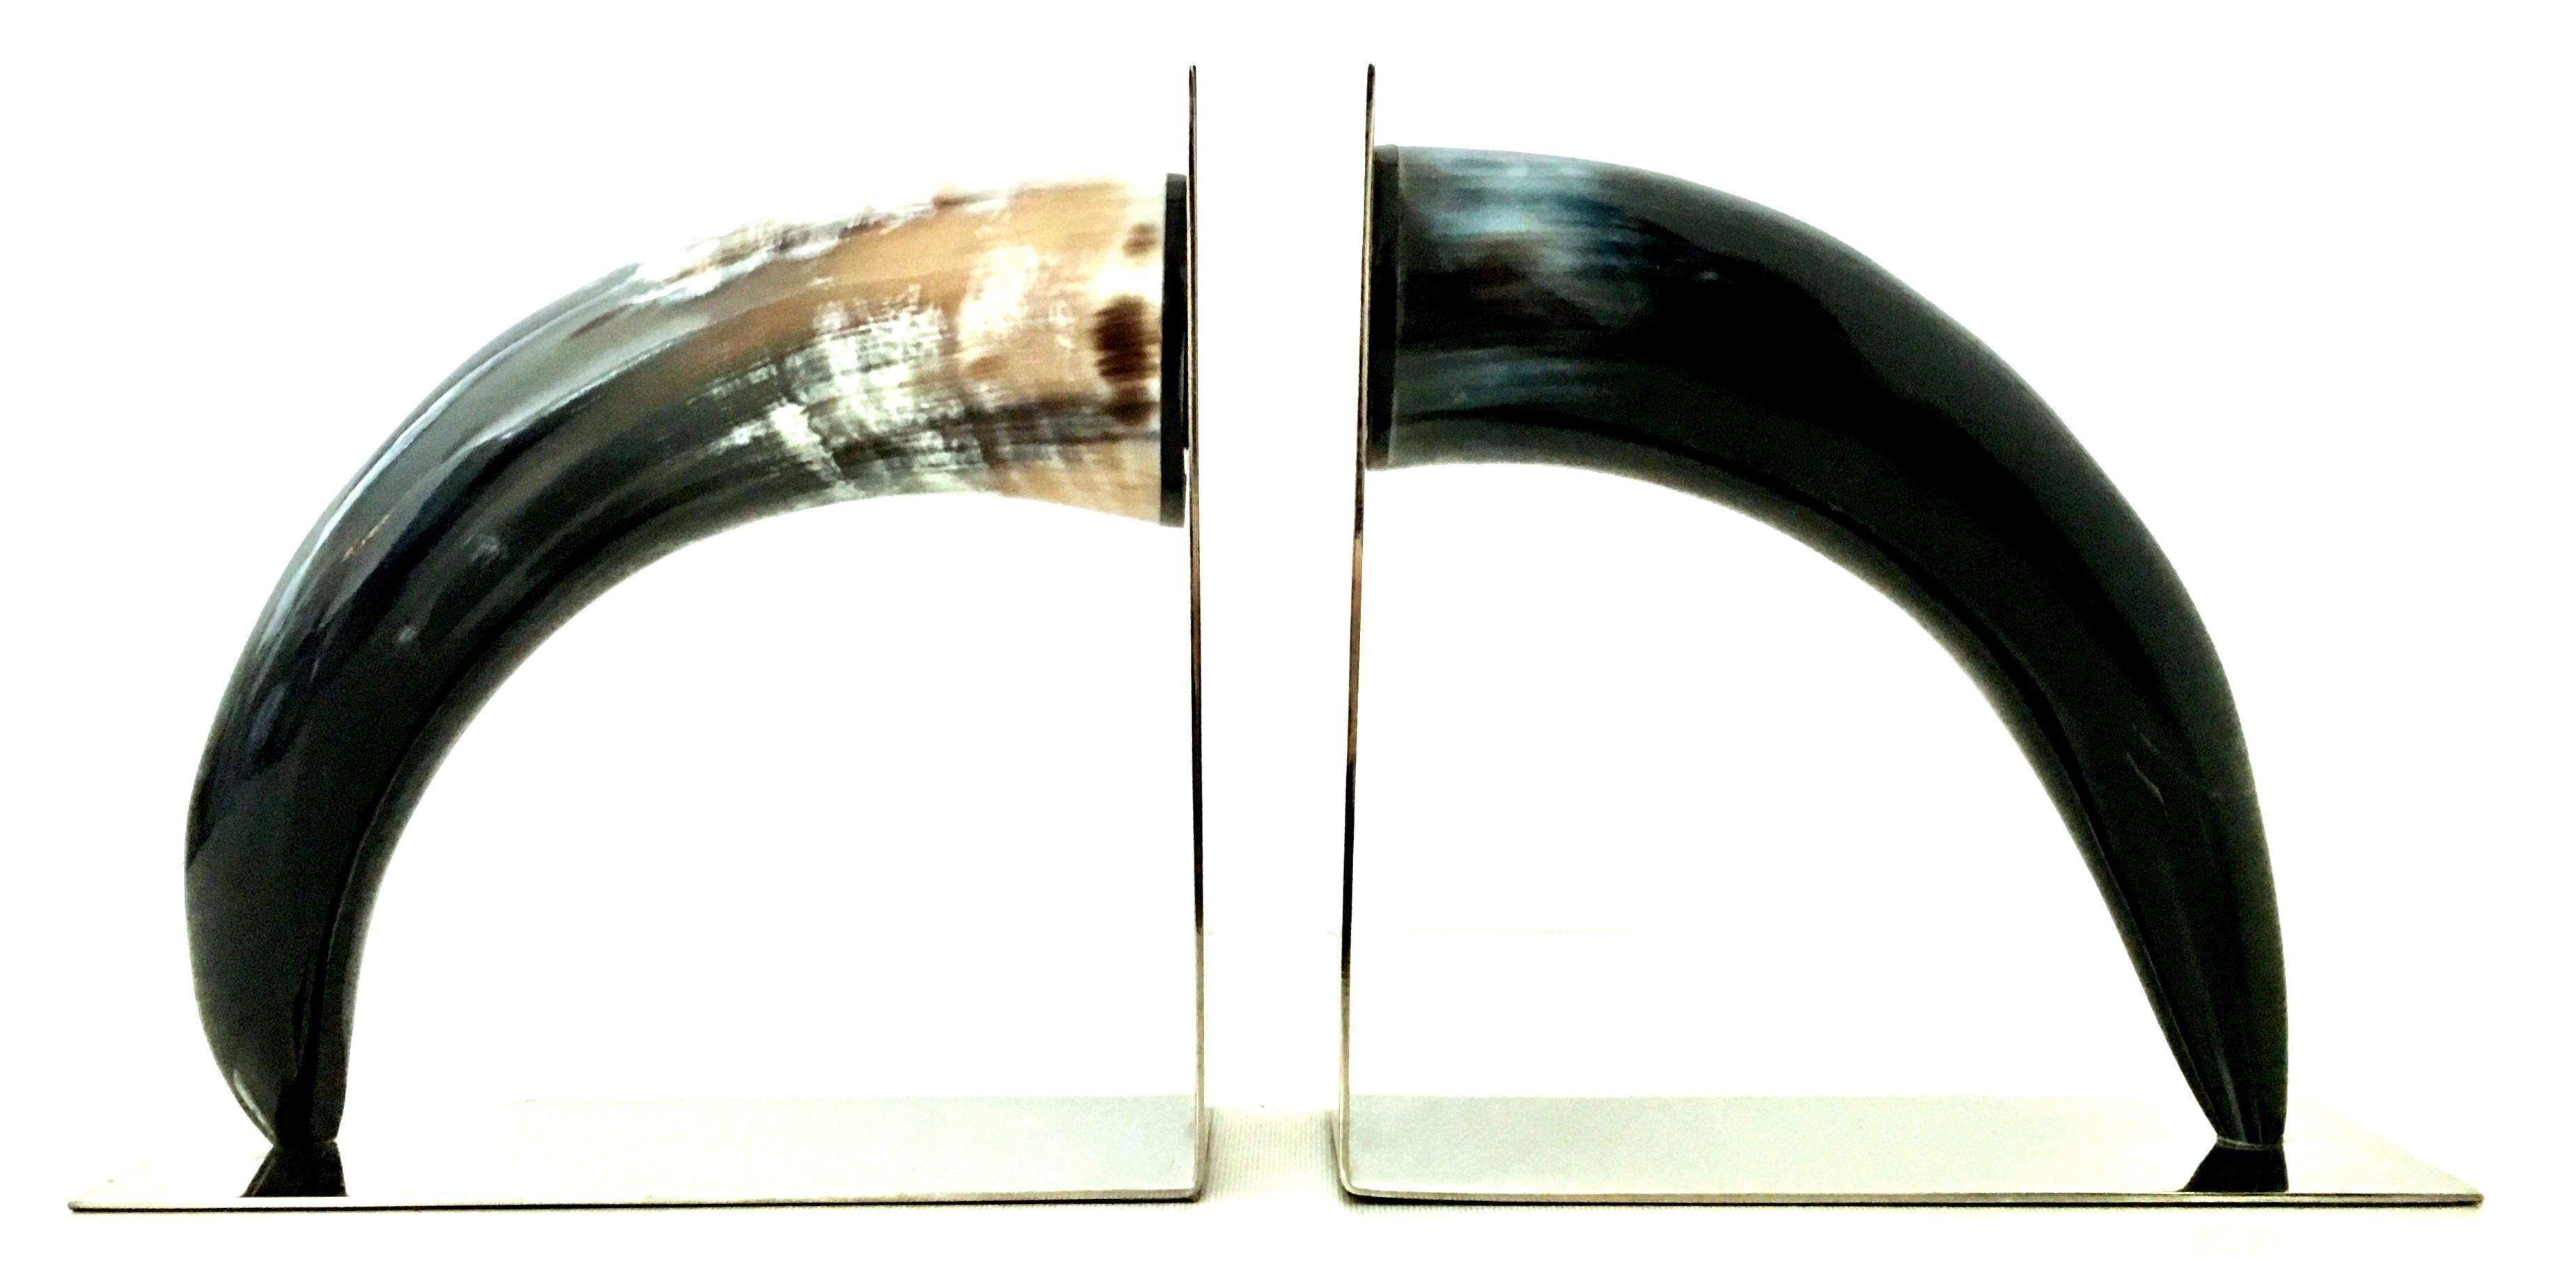 21st century pair of contemporary and sleek polished black natural Horn and chrome bookend sculptures. These timeless sculptural Horn bookends feature polished black and tan polished buffalo Horn mounted on sleek polished chrome book ends.
Each